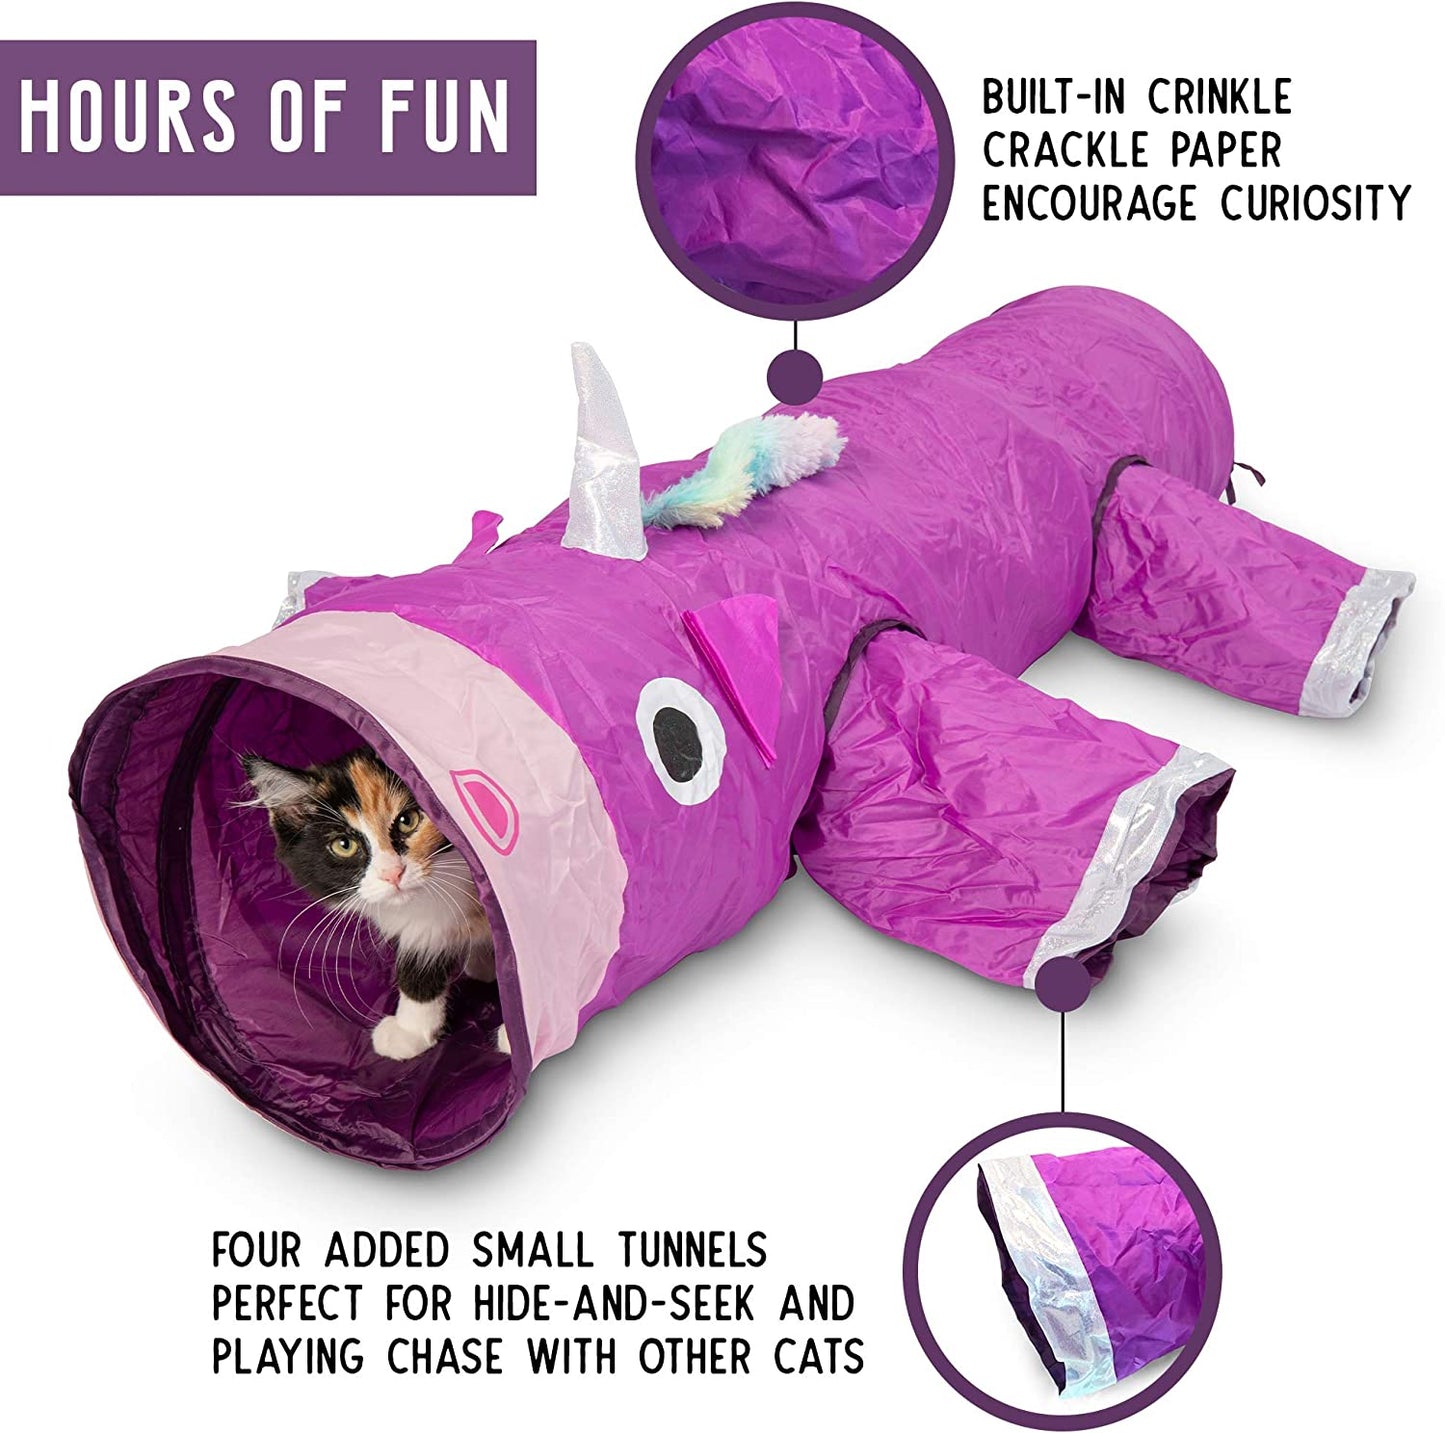 "Magical Mew-niverse Multi-Purpose Pet Tunnel: Endless Fun, Adventure, and Relaxation for Dogs, Cats, and Small Animals!"